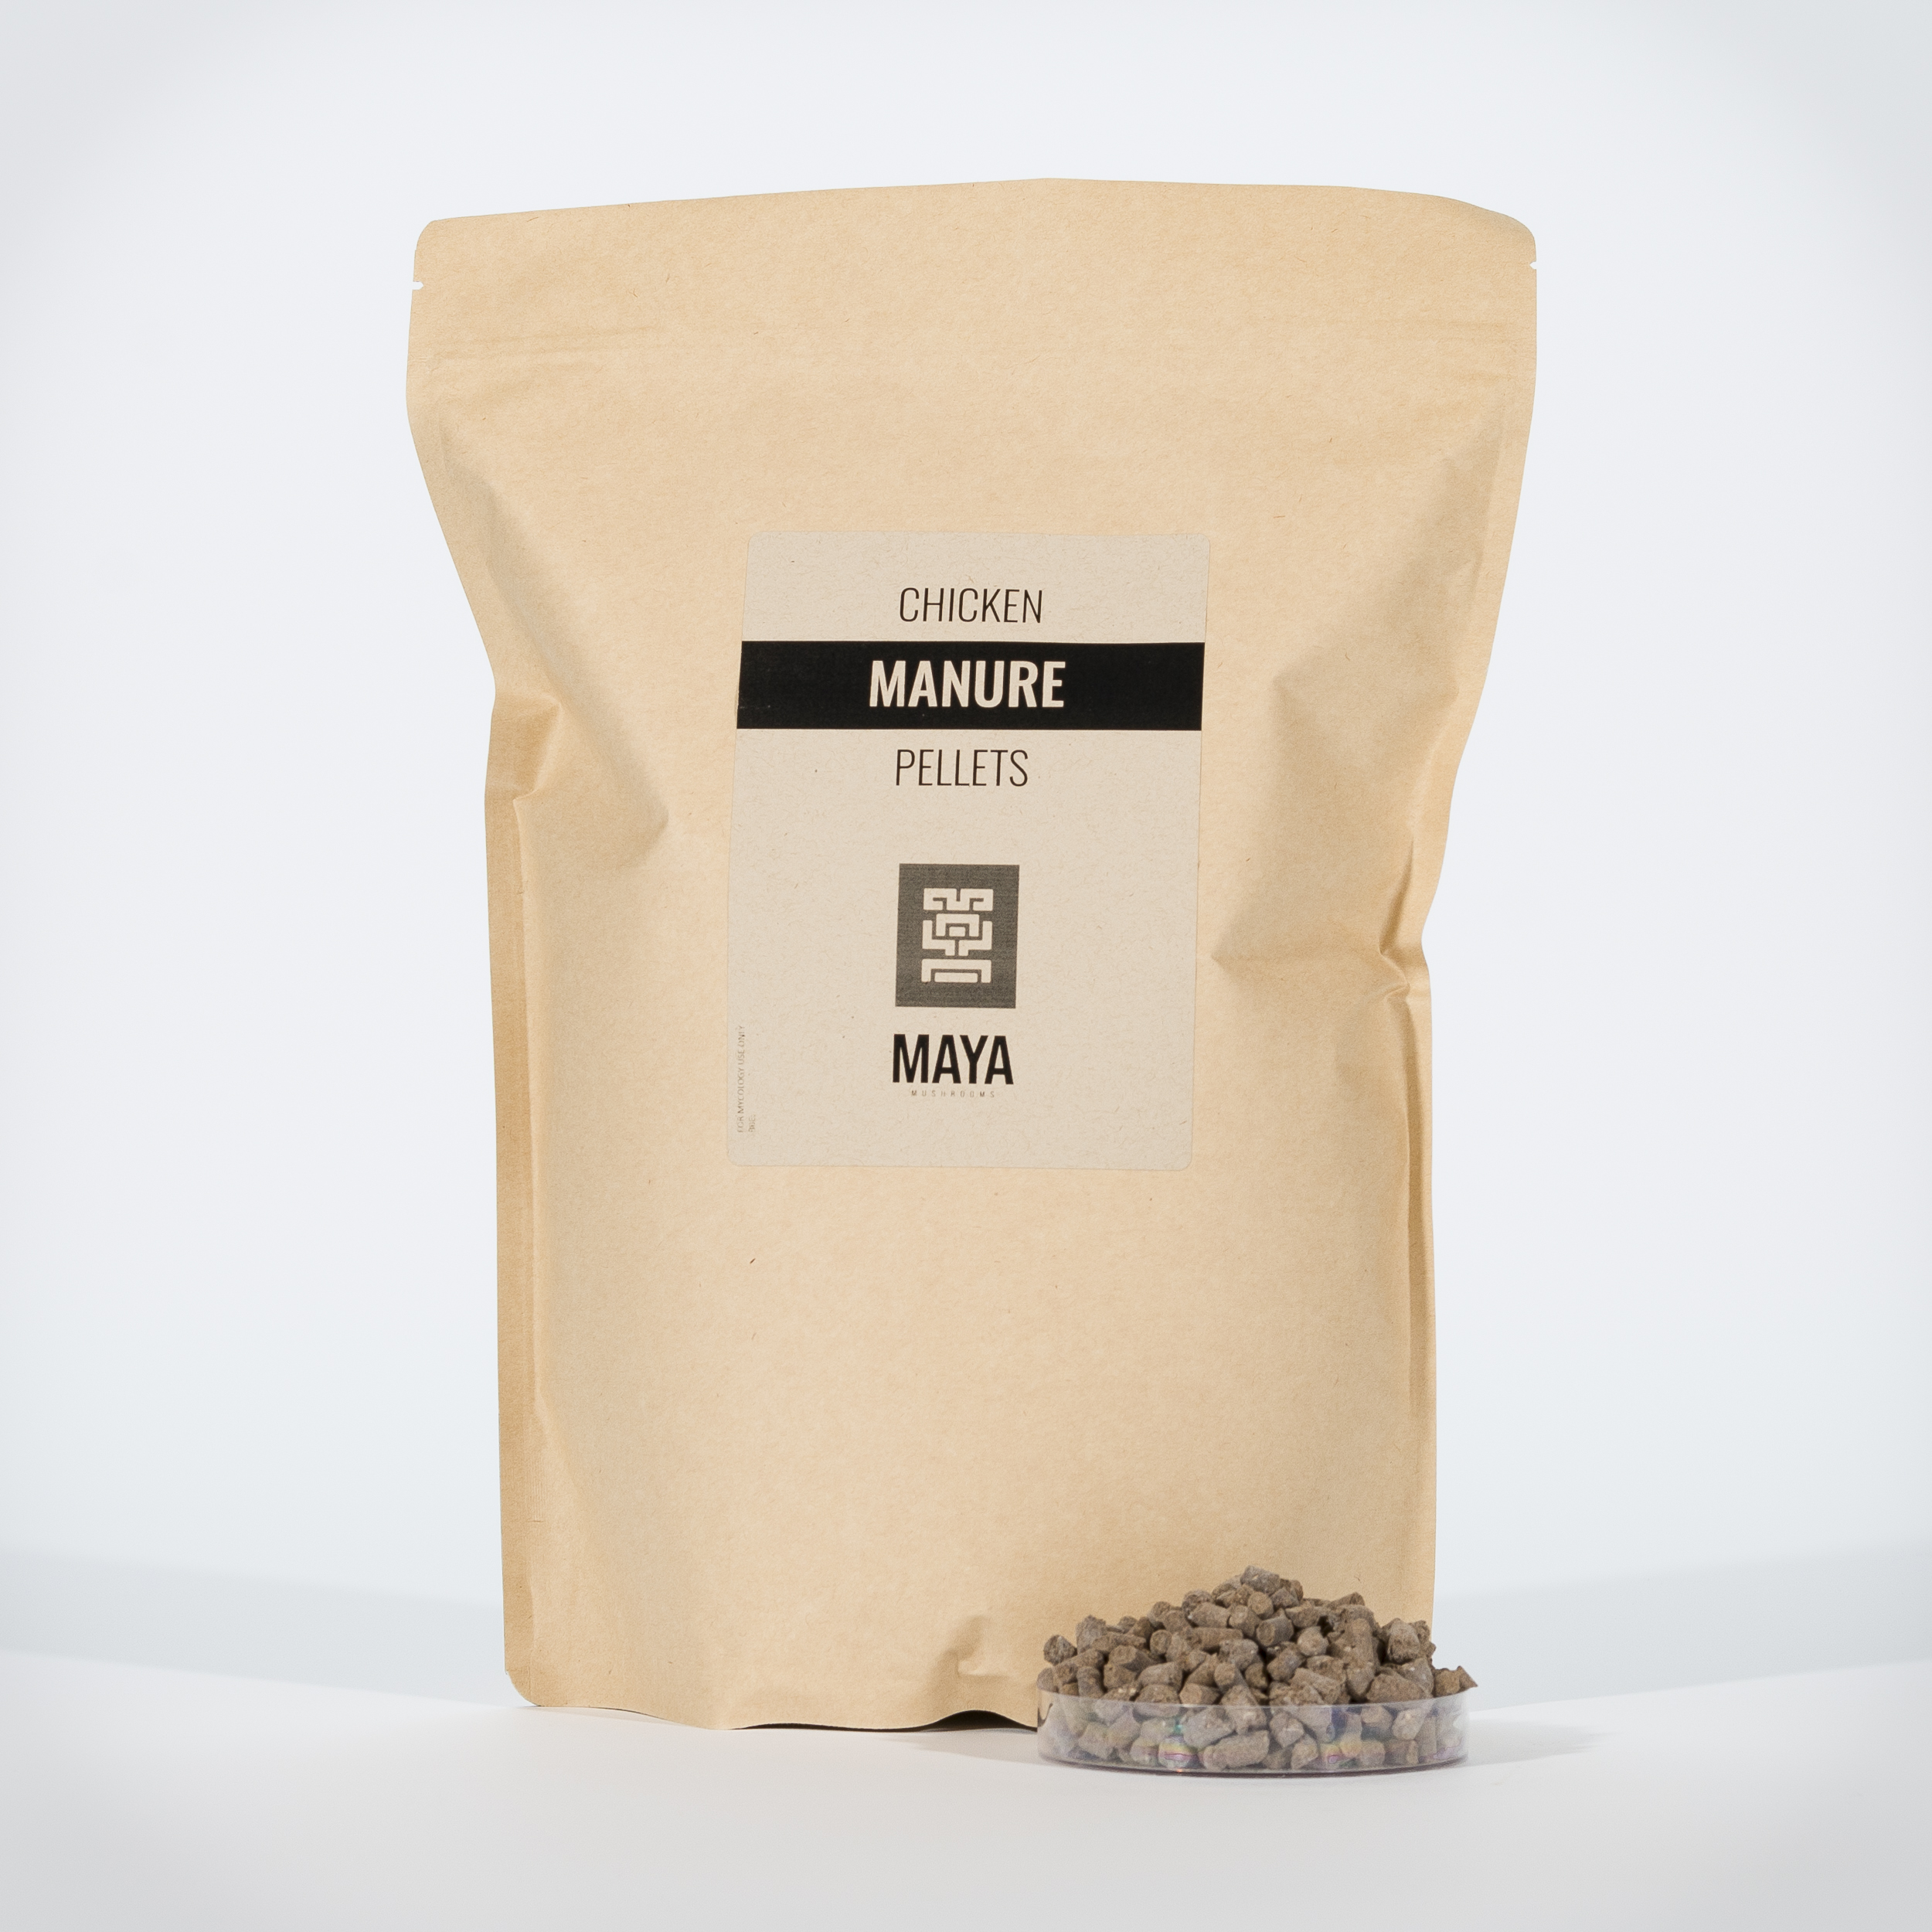 Chicken Manure Pellets in Pouch - Front